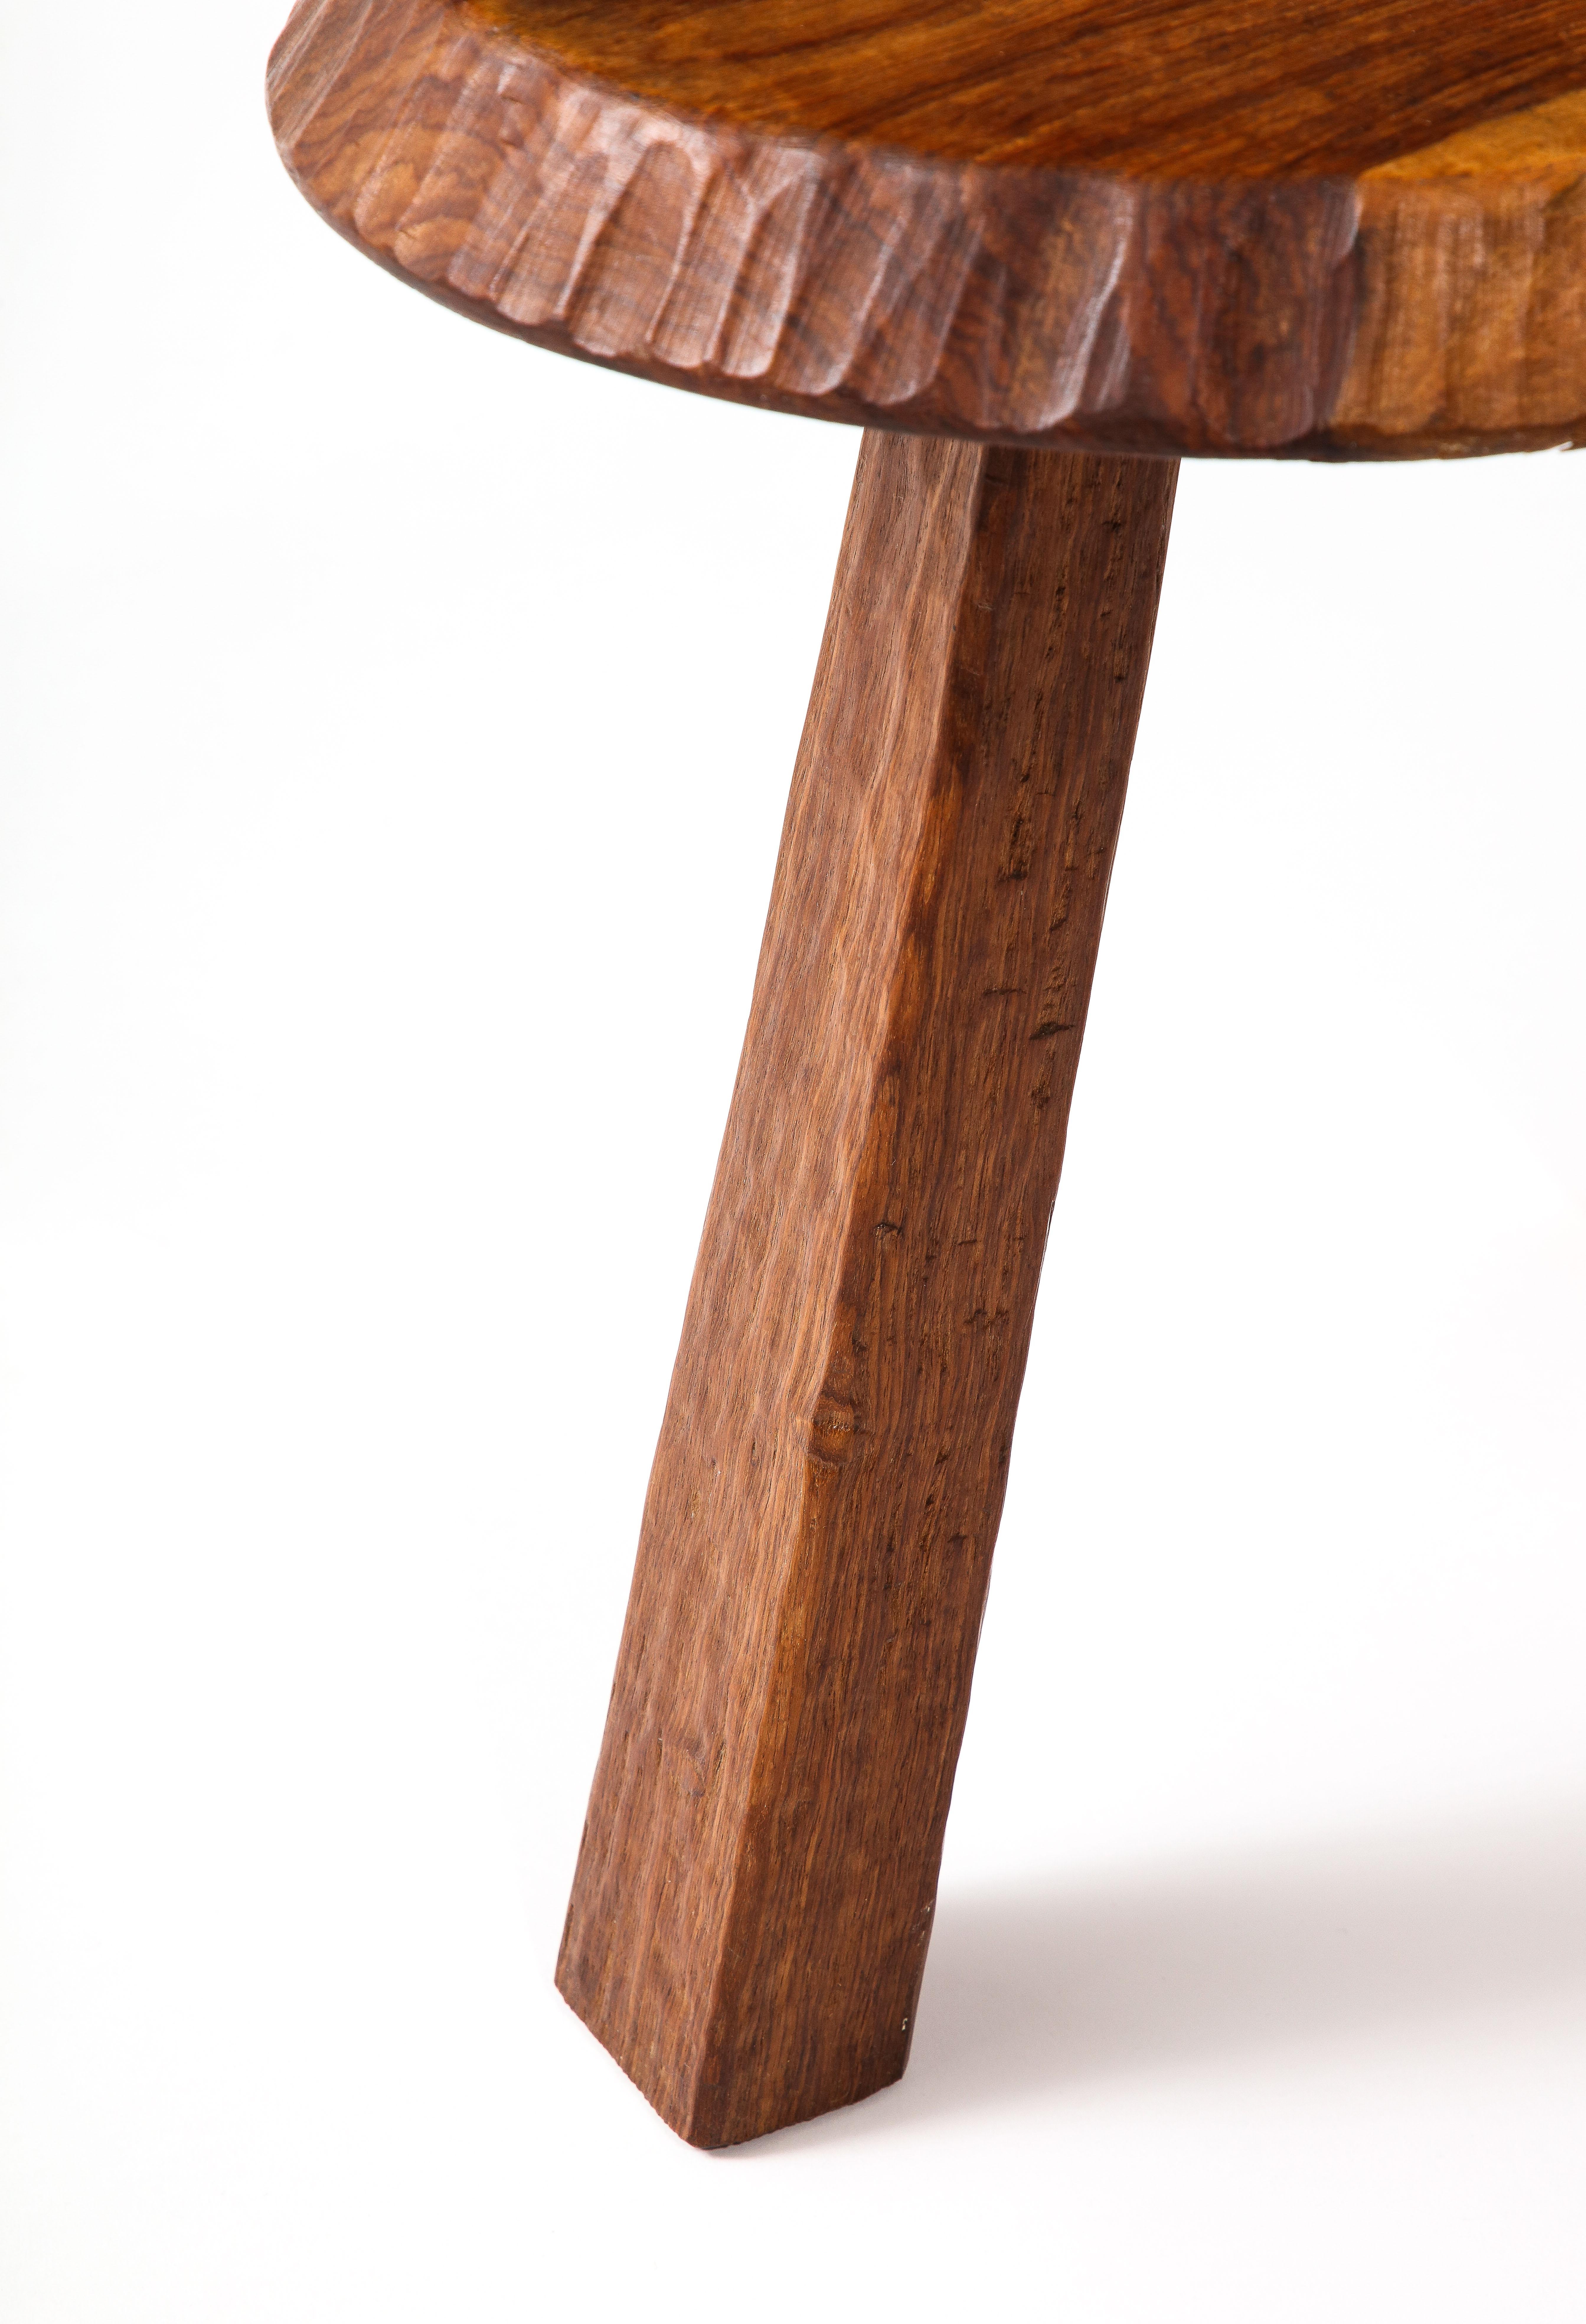 Solid carved walnut stool or occasional table with a gouged edge.

